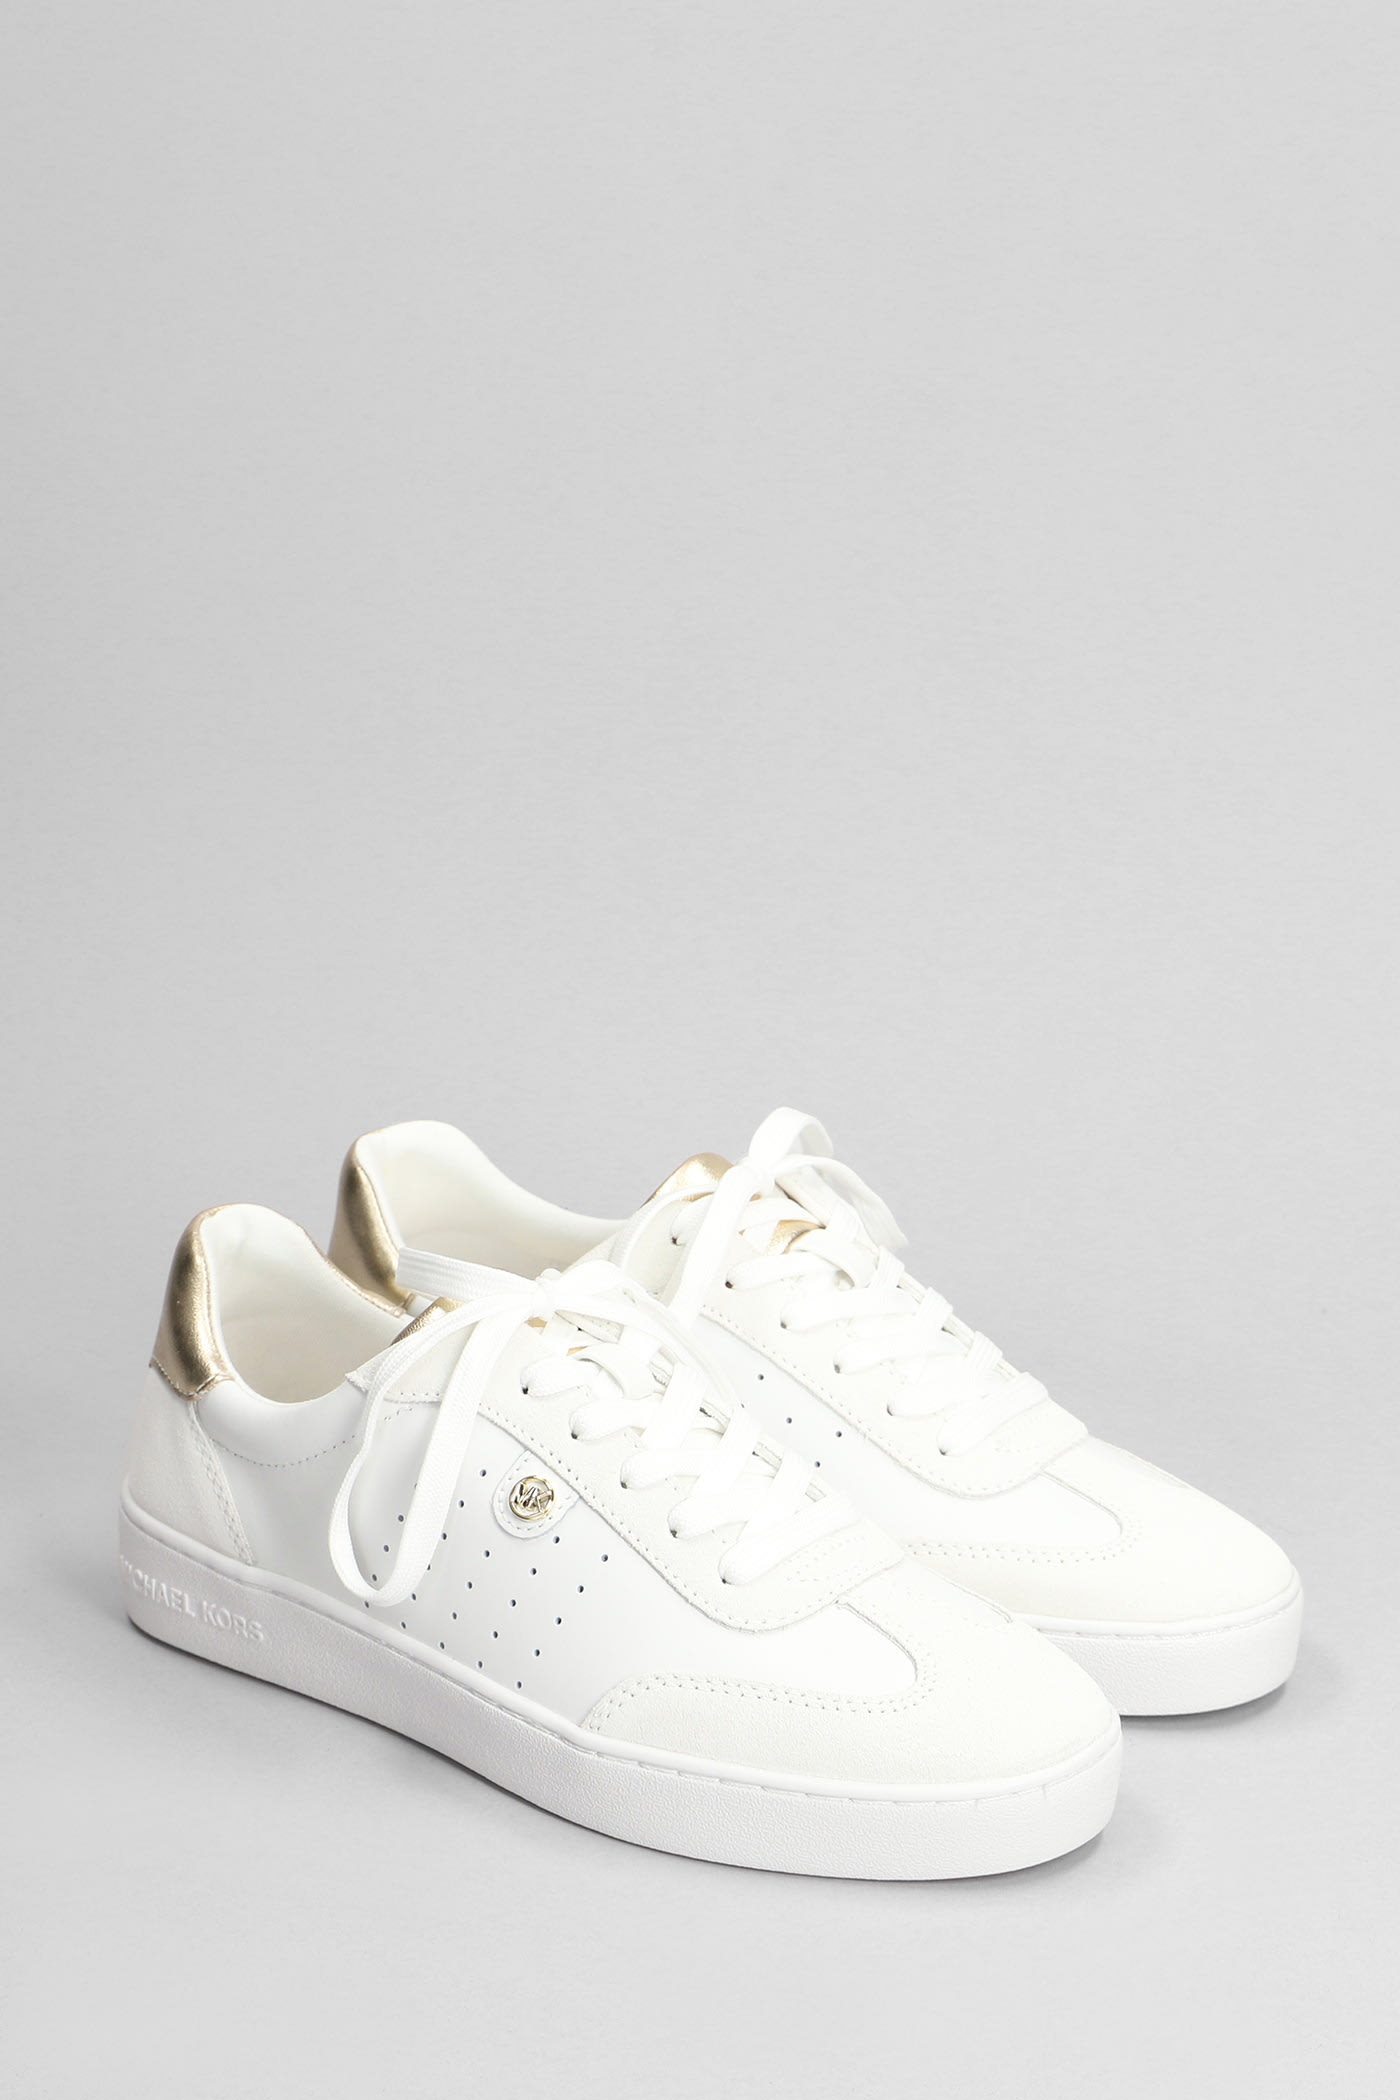 Shop Michael Kors Scotty Sneakers In White Suede And Leather